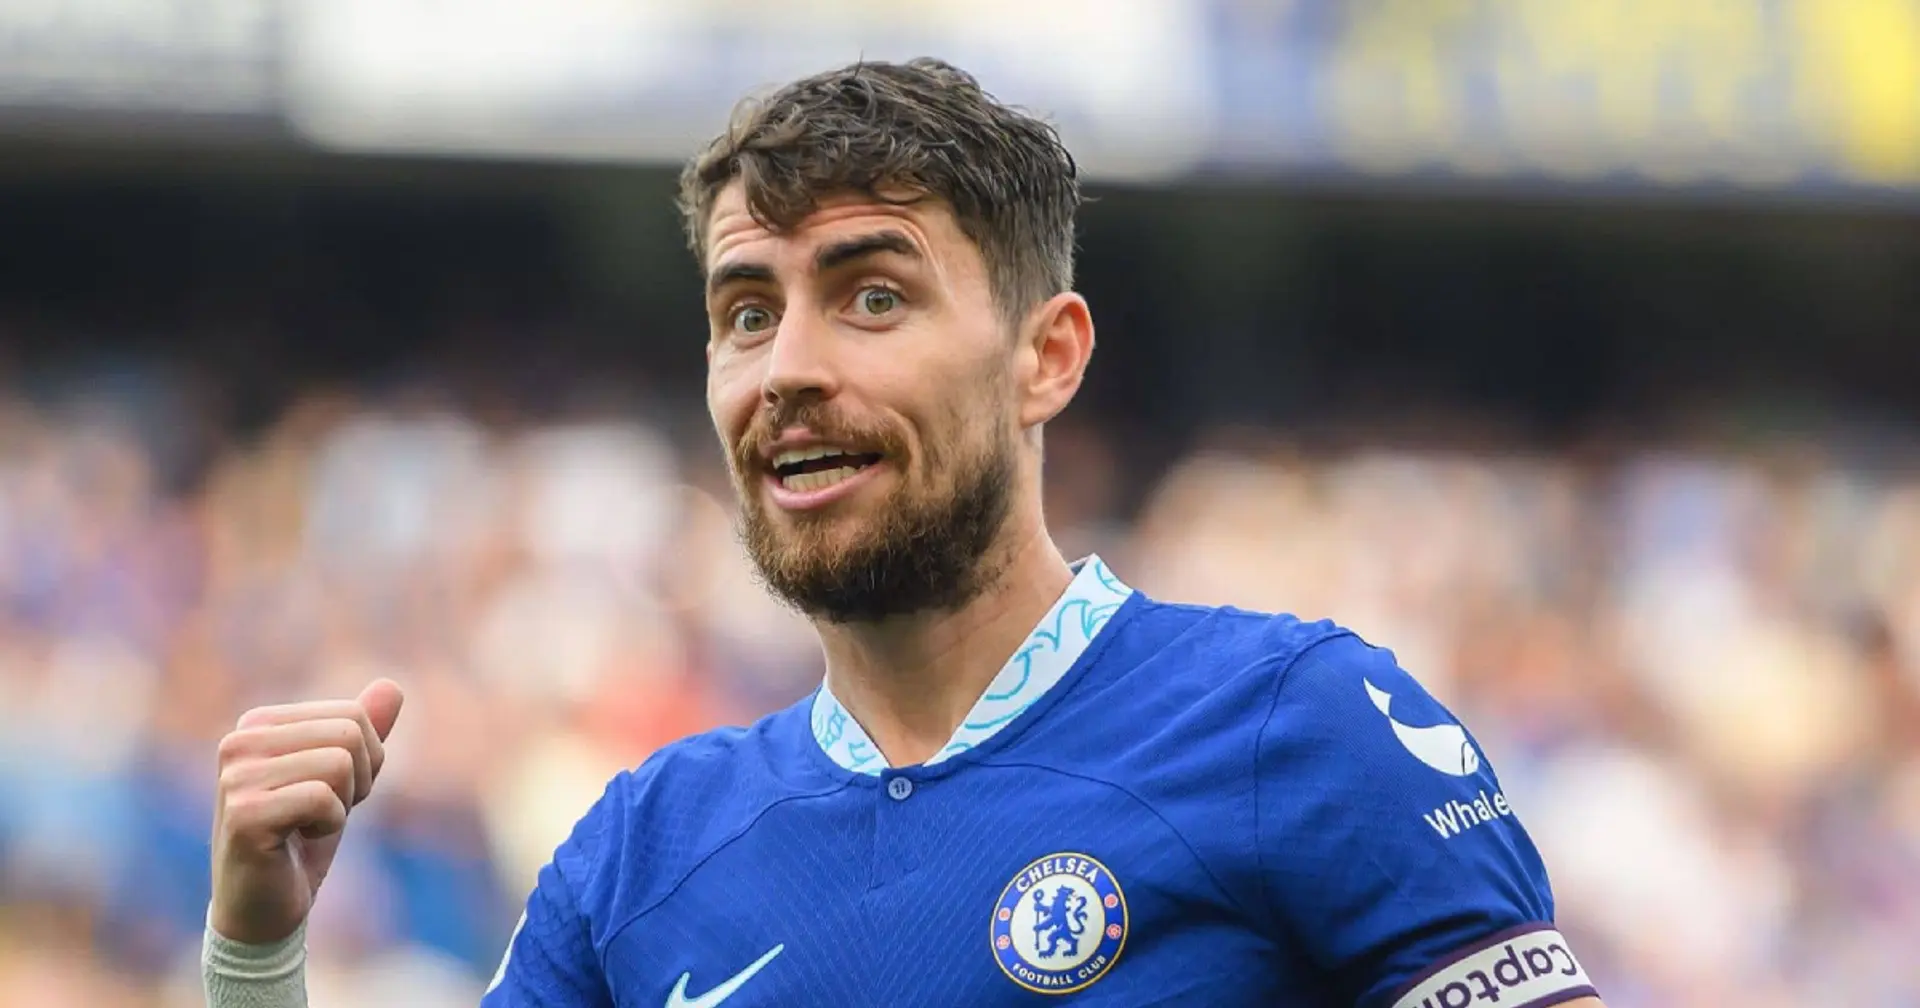 New contract talks scheduled with Jorginho, 2 European clubs 'lie in wait' (reliability: 5 stars)